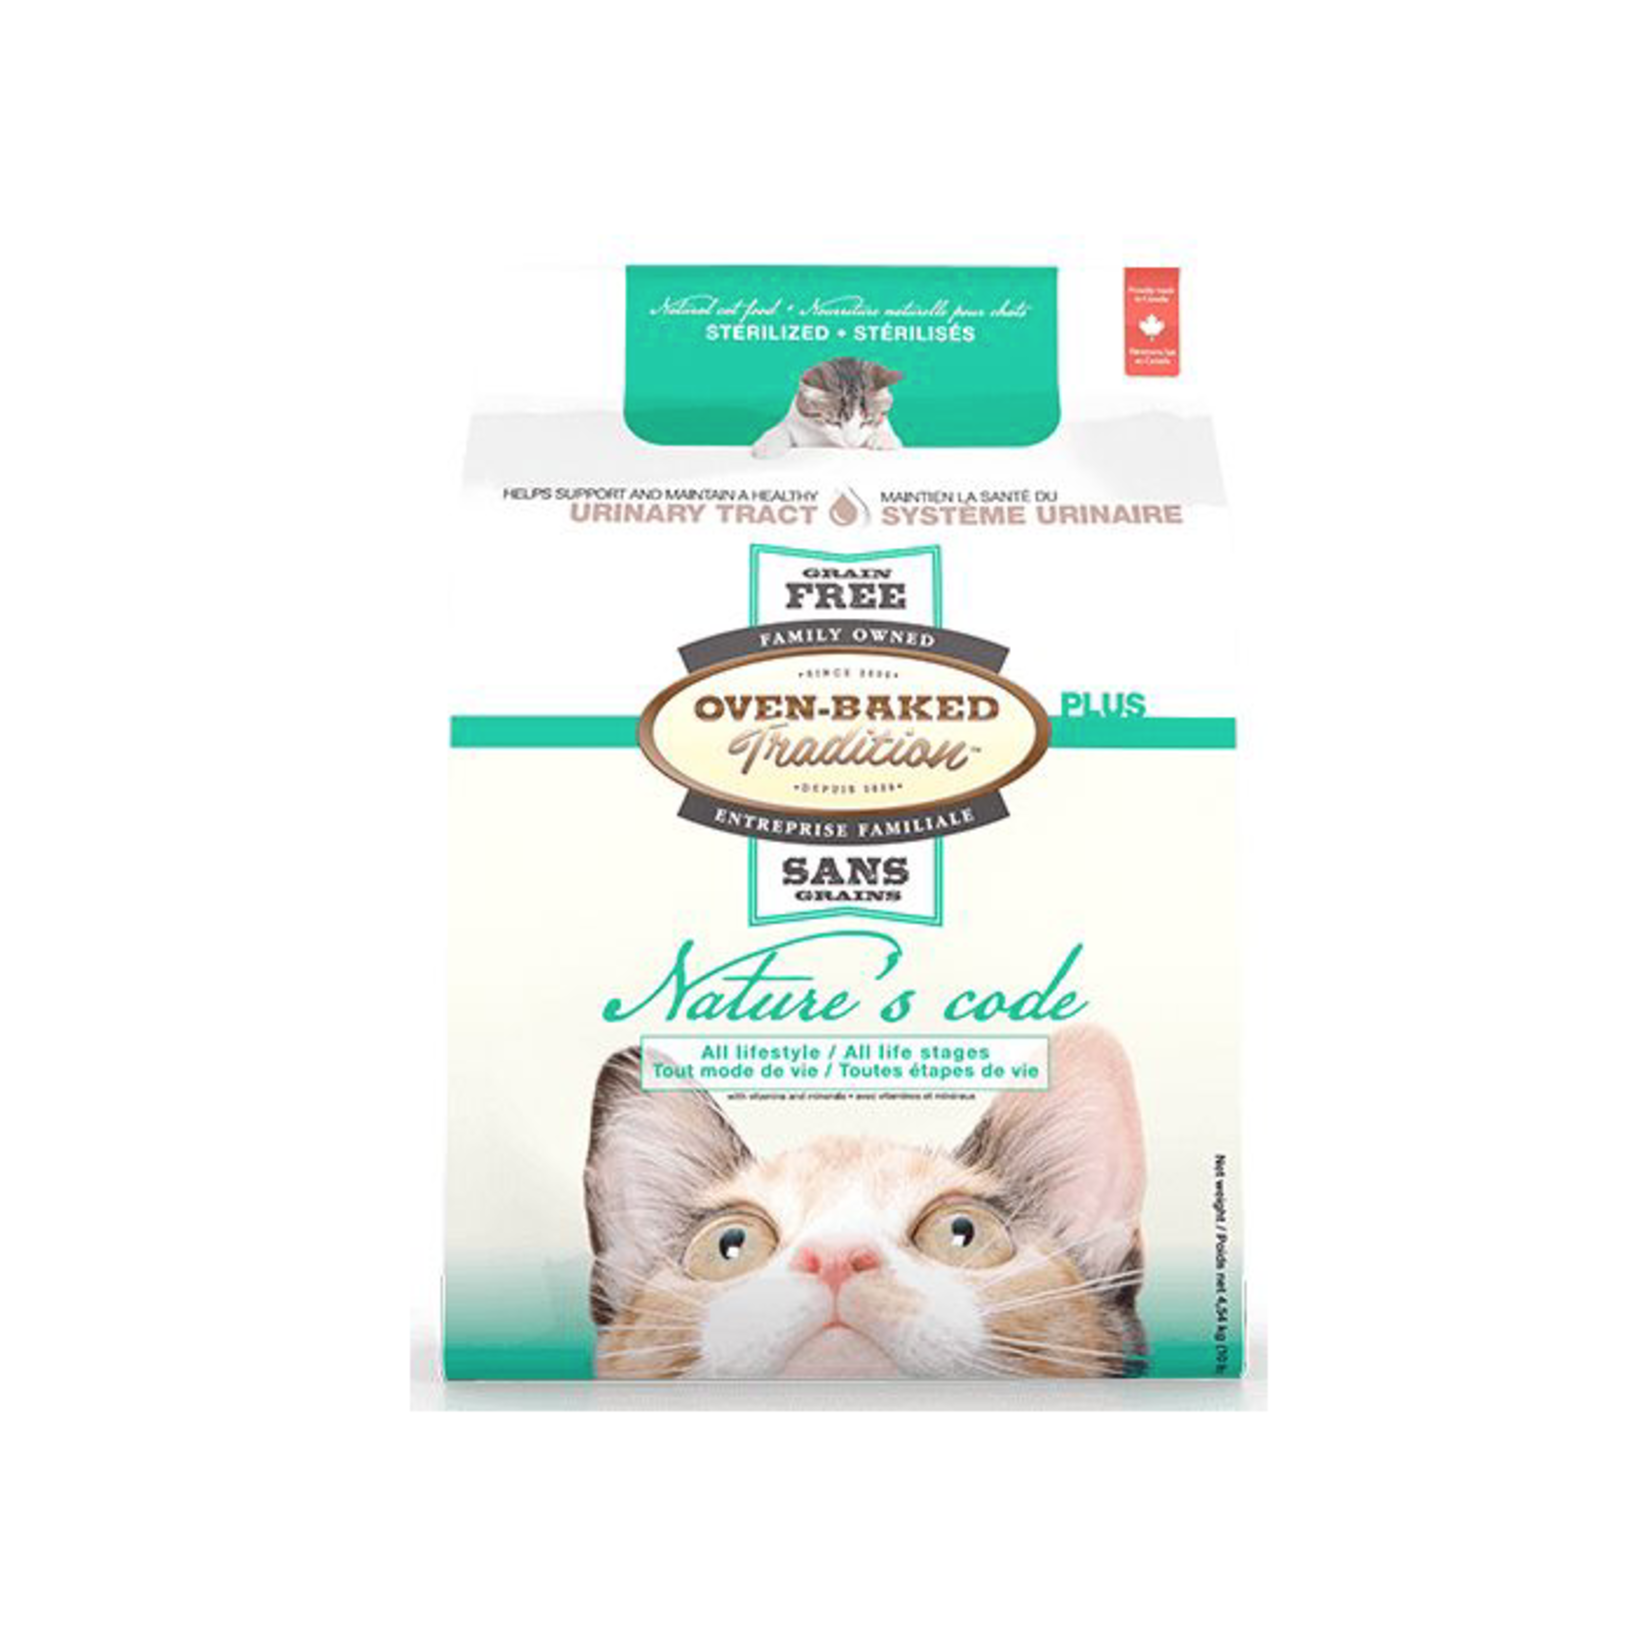 OVEN BAKED TRADITION Oven - Baked Natures Code Urinary Tract Chicken Cat 2.5lb